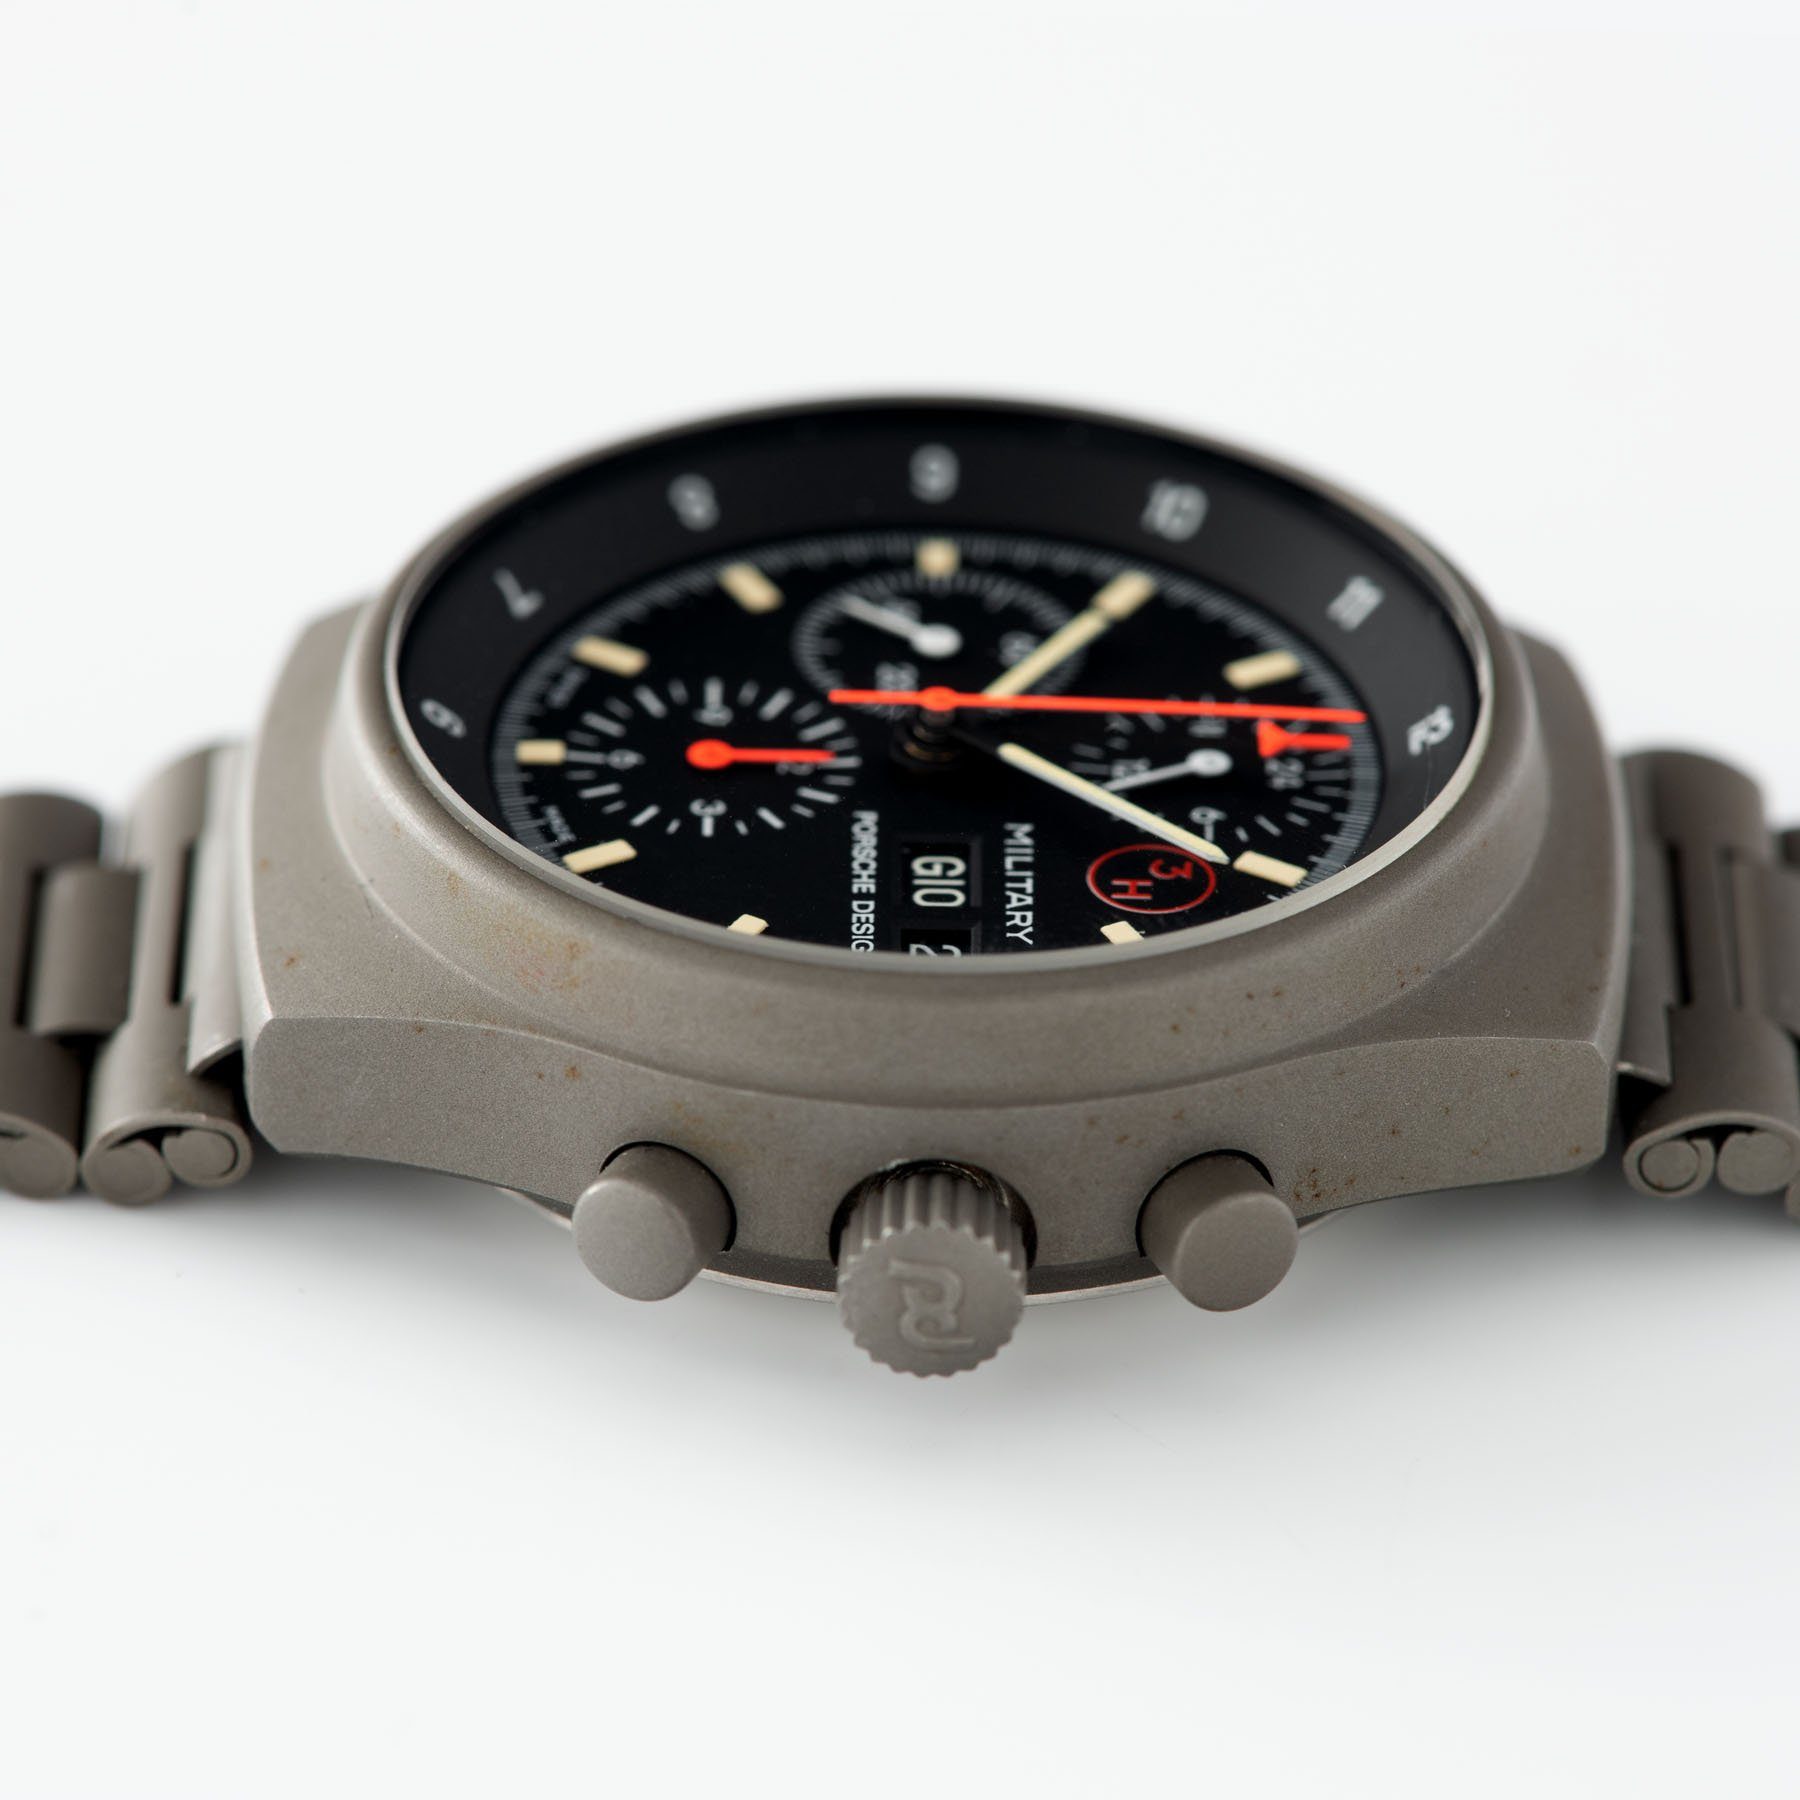 Porsche Design by Orfina 'Military' Chronograph Reference 7177 42mm steel case